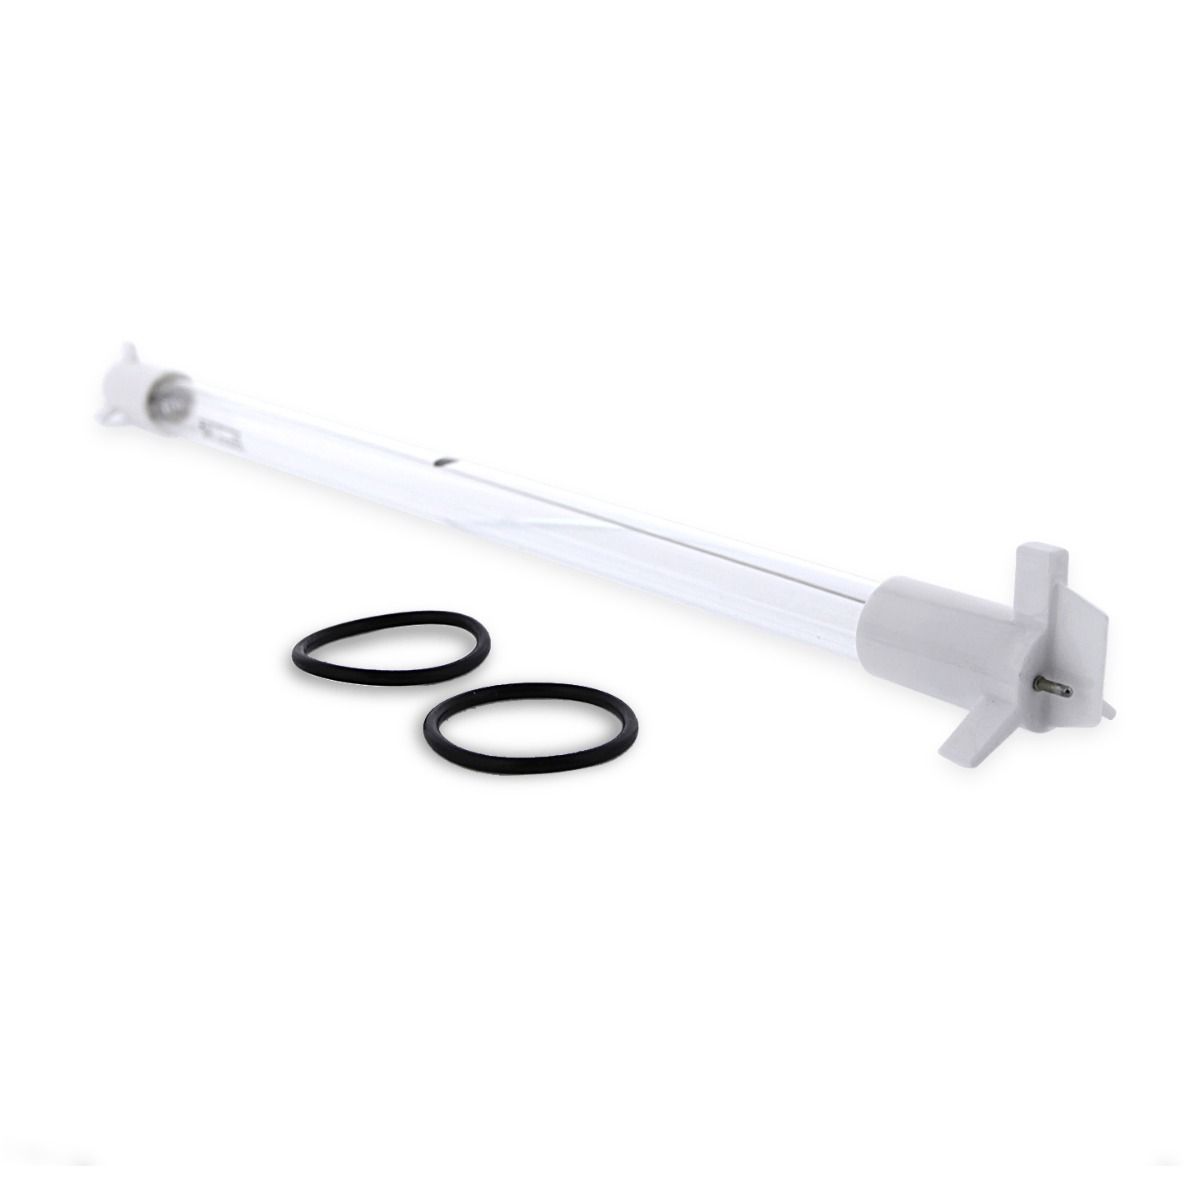 USWF Replacement for 602856 UV Lamp | Fits the VIQUA J/J+/K/K+, Pro 30, Pro 50, S80, SM80, &amp; SV50 Series UV Systems